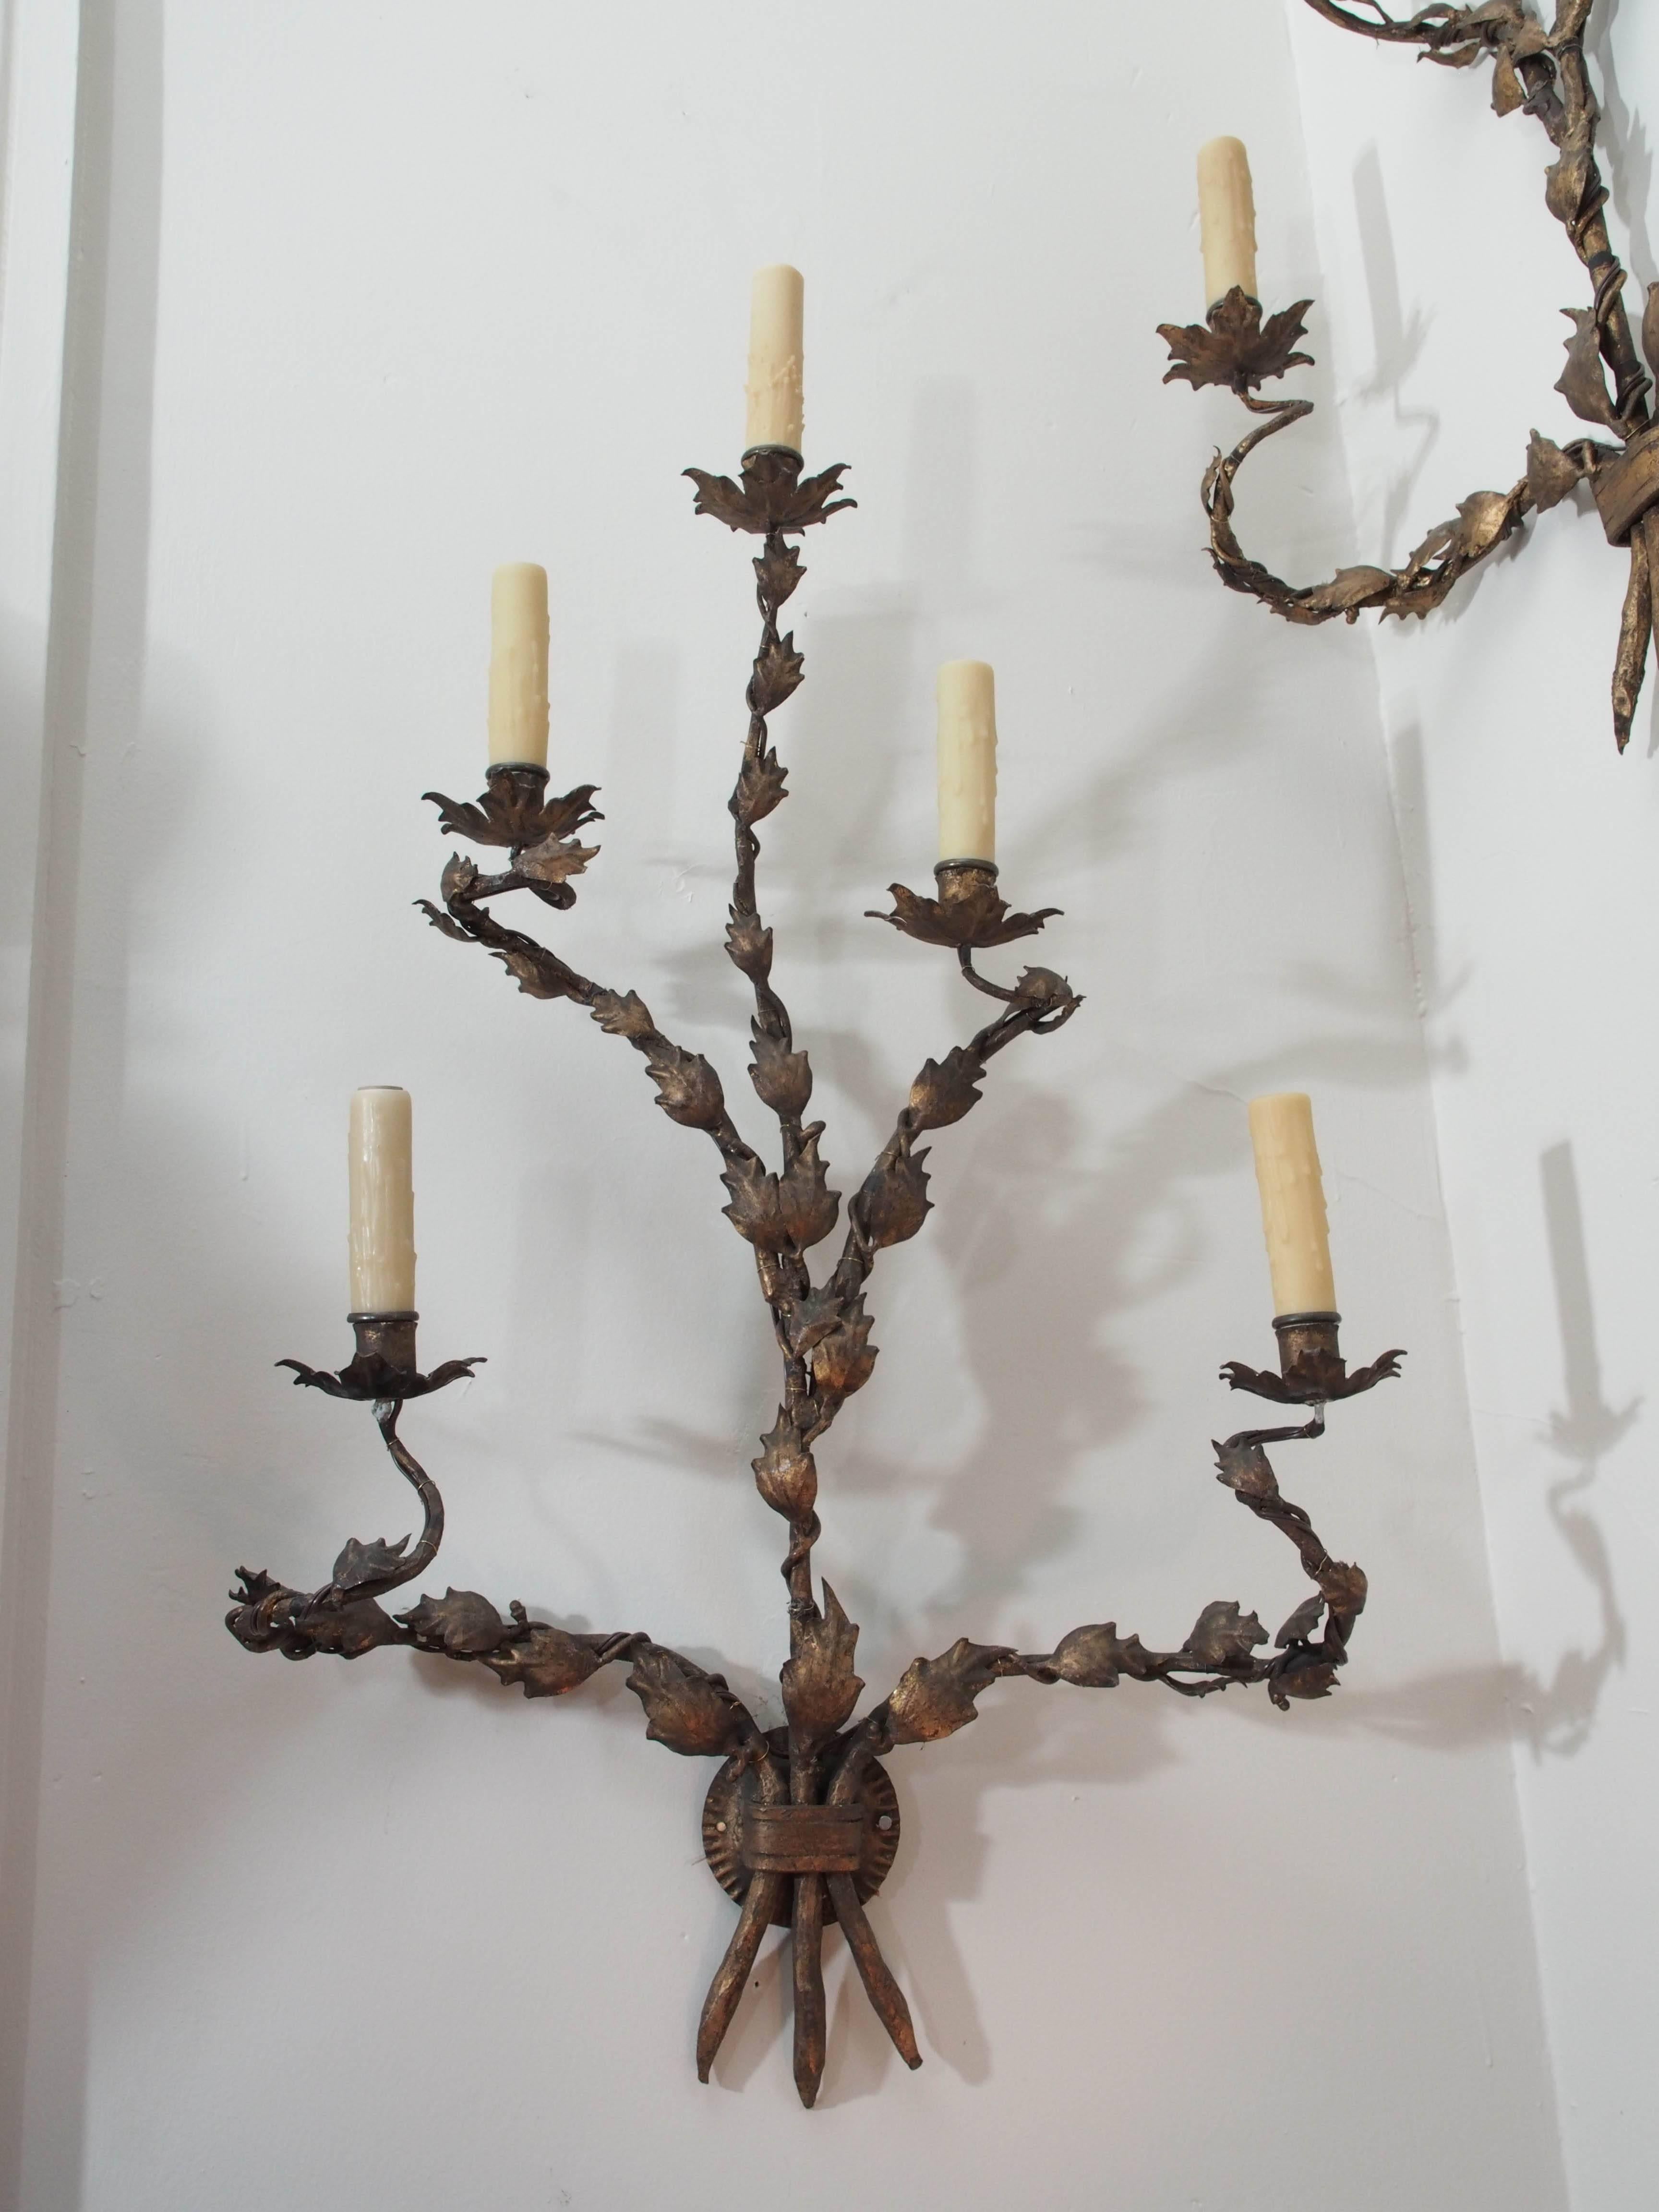 Pair of  19th Century coppered bronze sconces. 5 lights each. US Wired
Foliage design